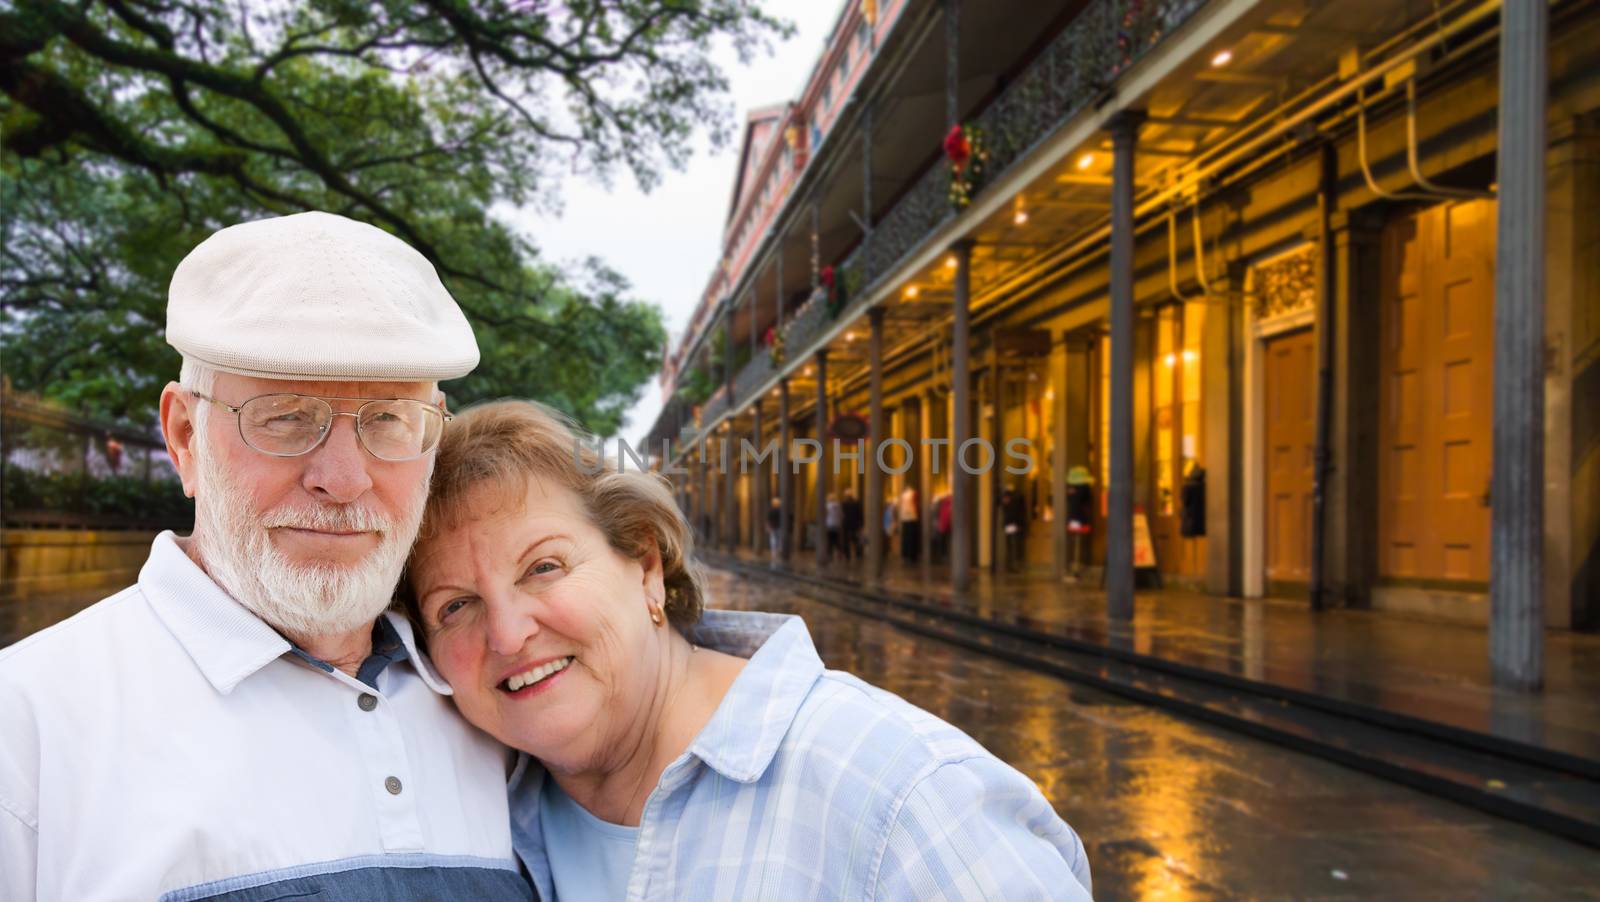 Happy Senior Adult Couple Enjoying an Evening in New Orleans, Lo by Feverpitched